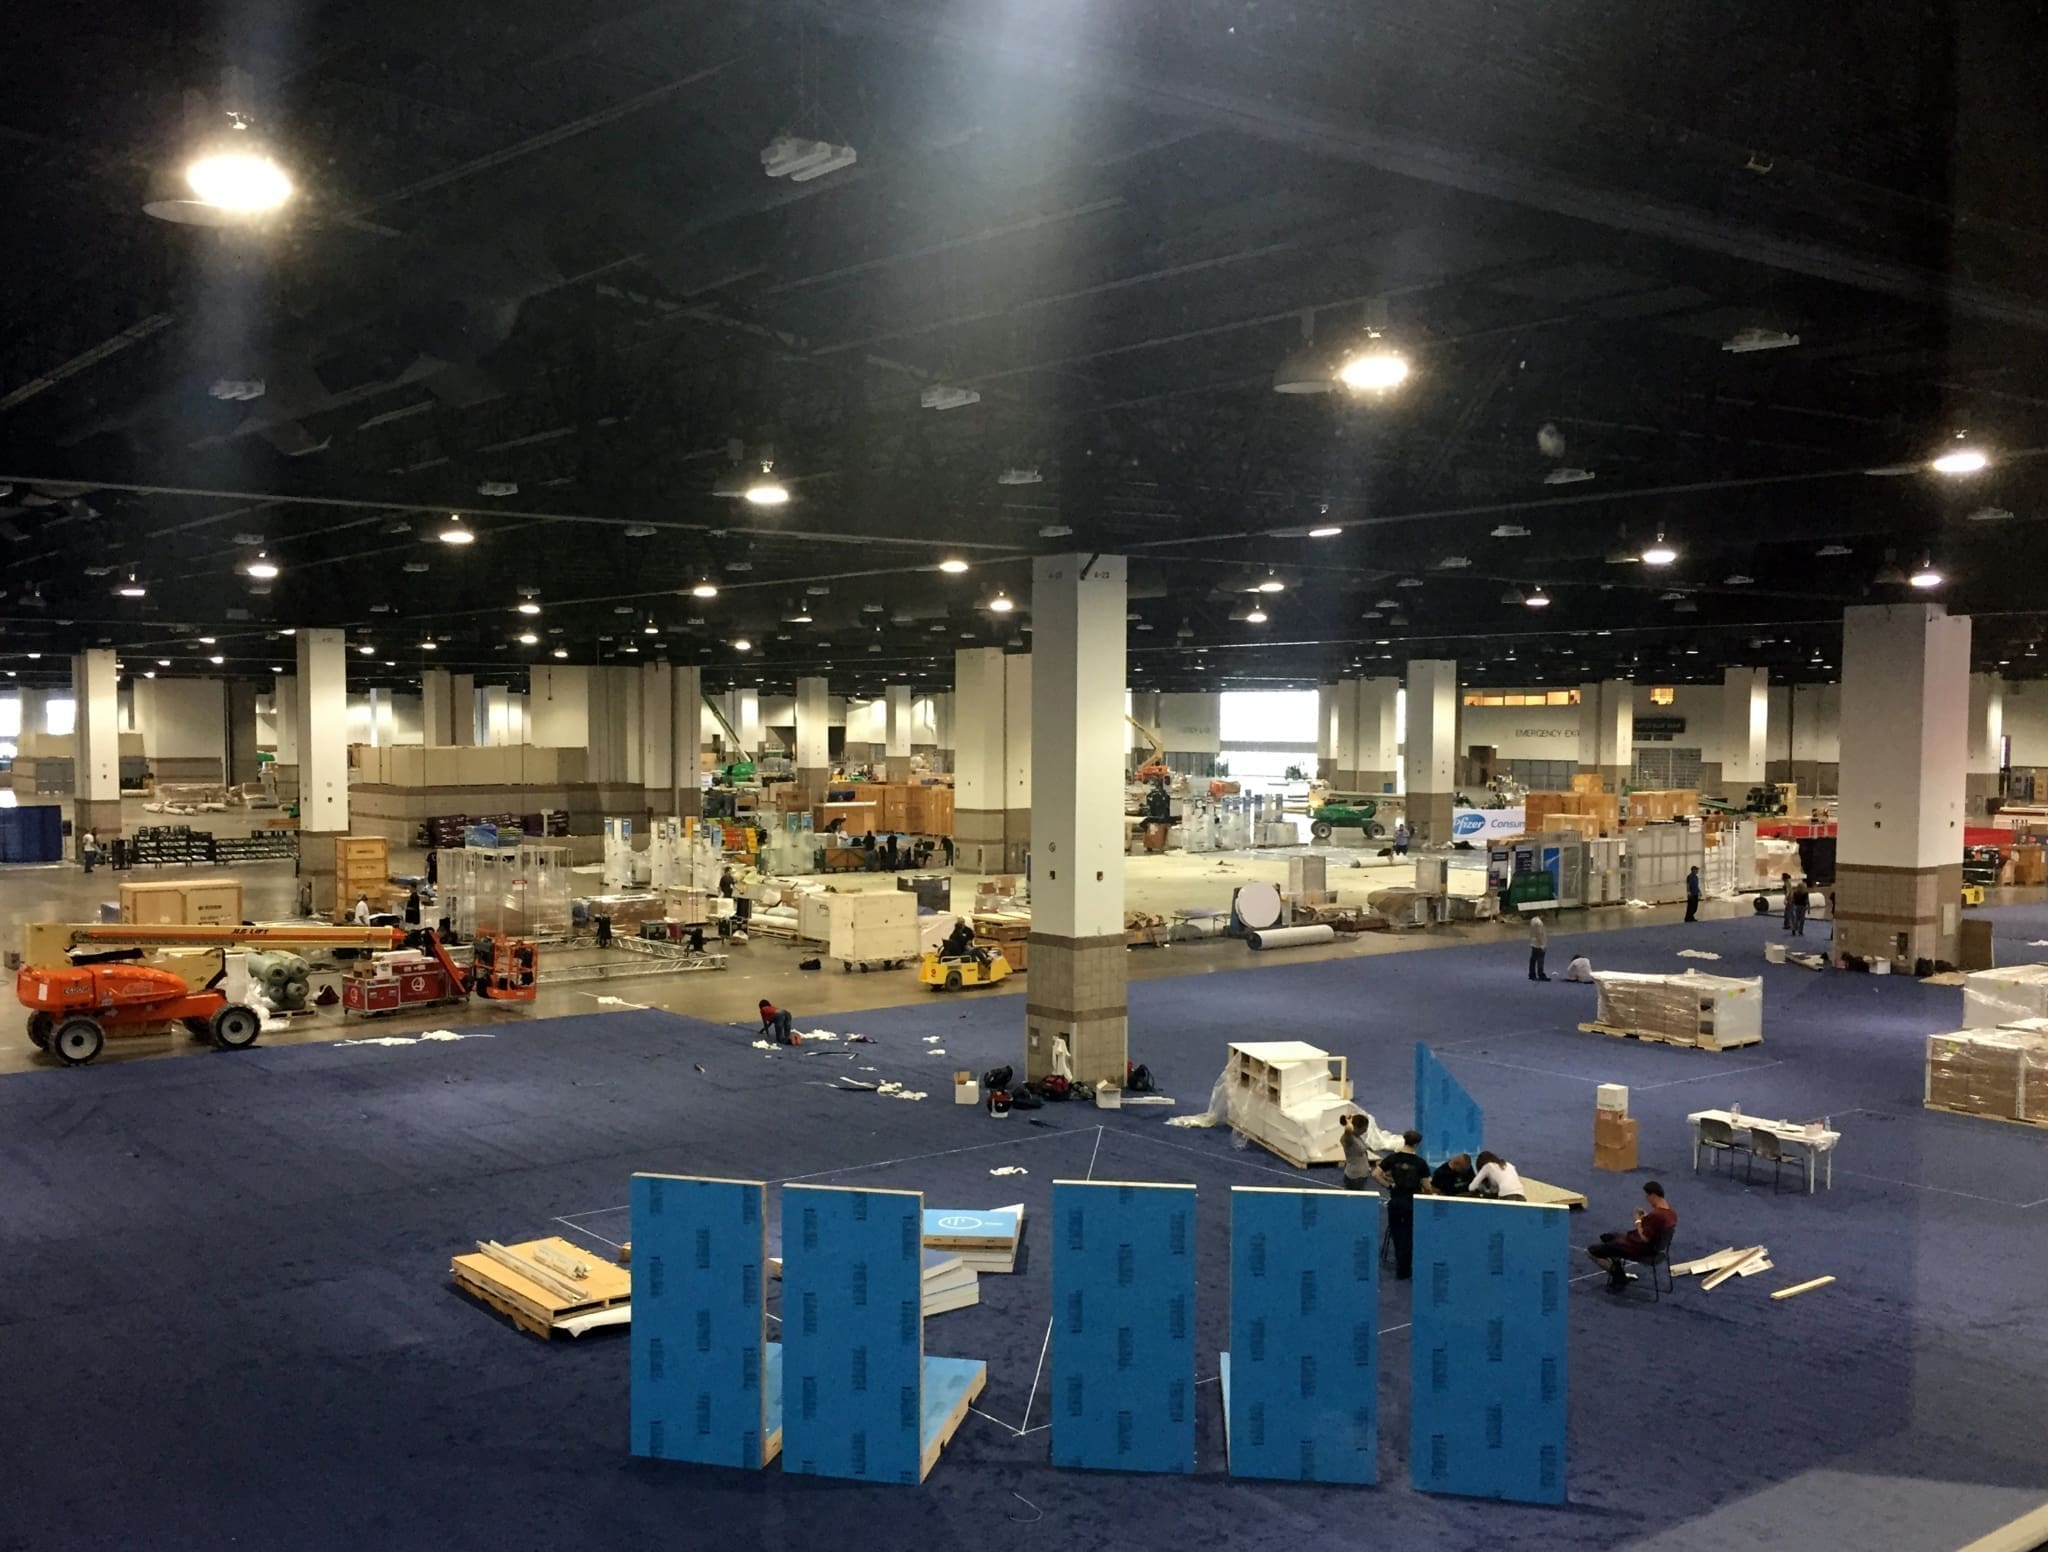 Preparations are under way for the third annual NACDS Total Store Expo, August 22-25, in Denver. See you there!